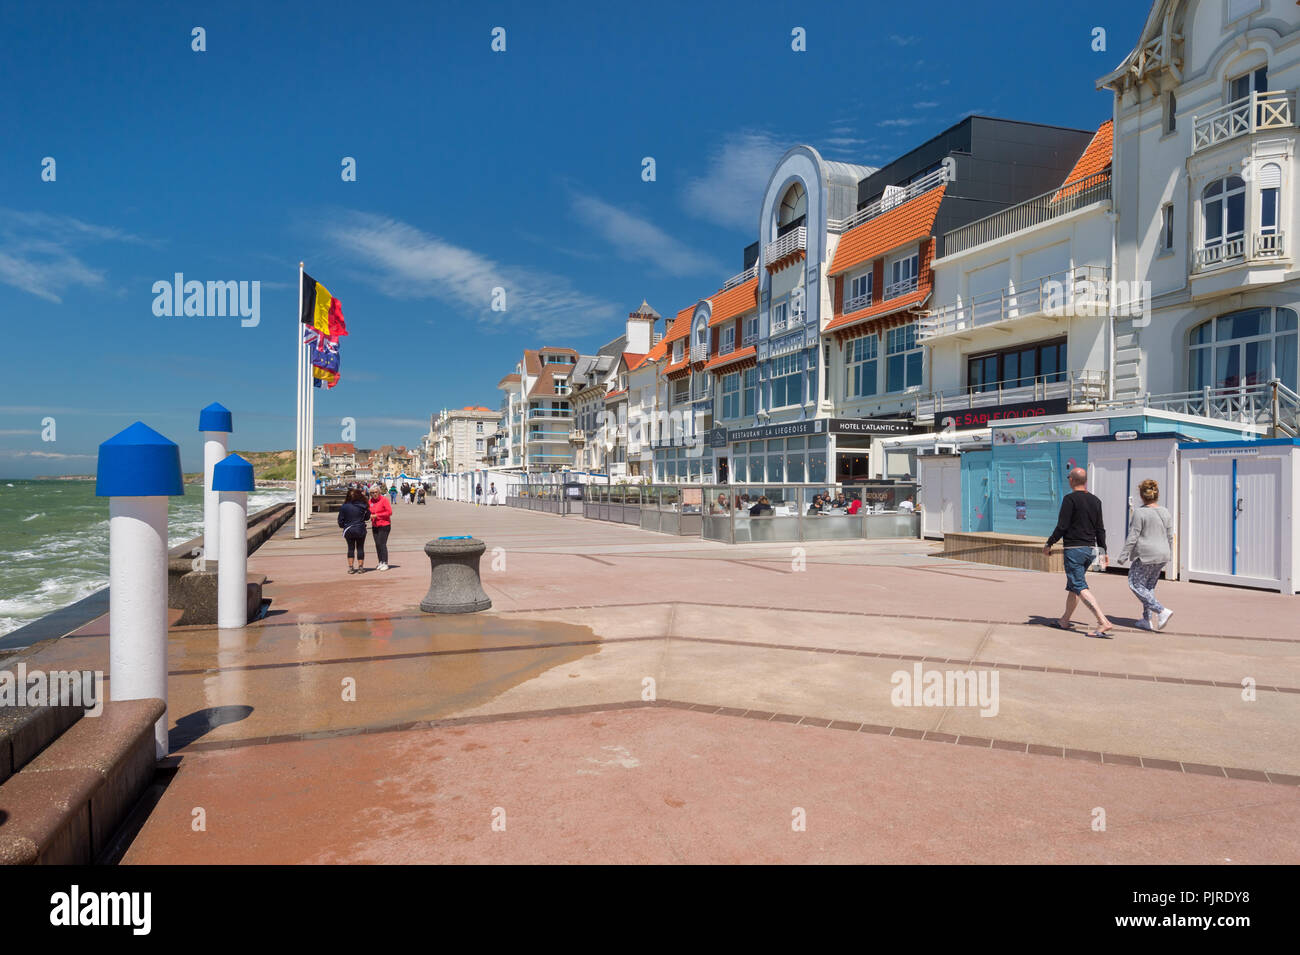 Wimereux, France - 16 June 2018: People walking on the sea front promenade Stock Photo